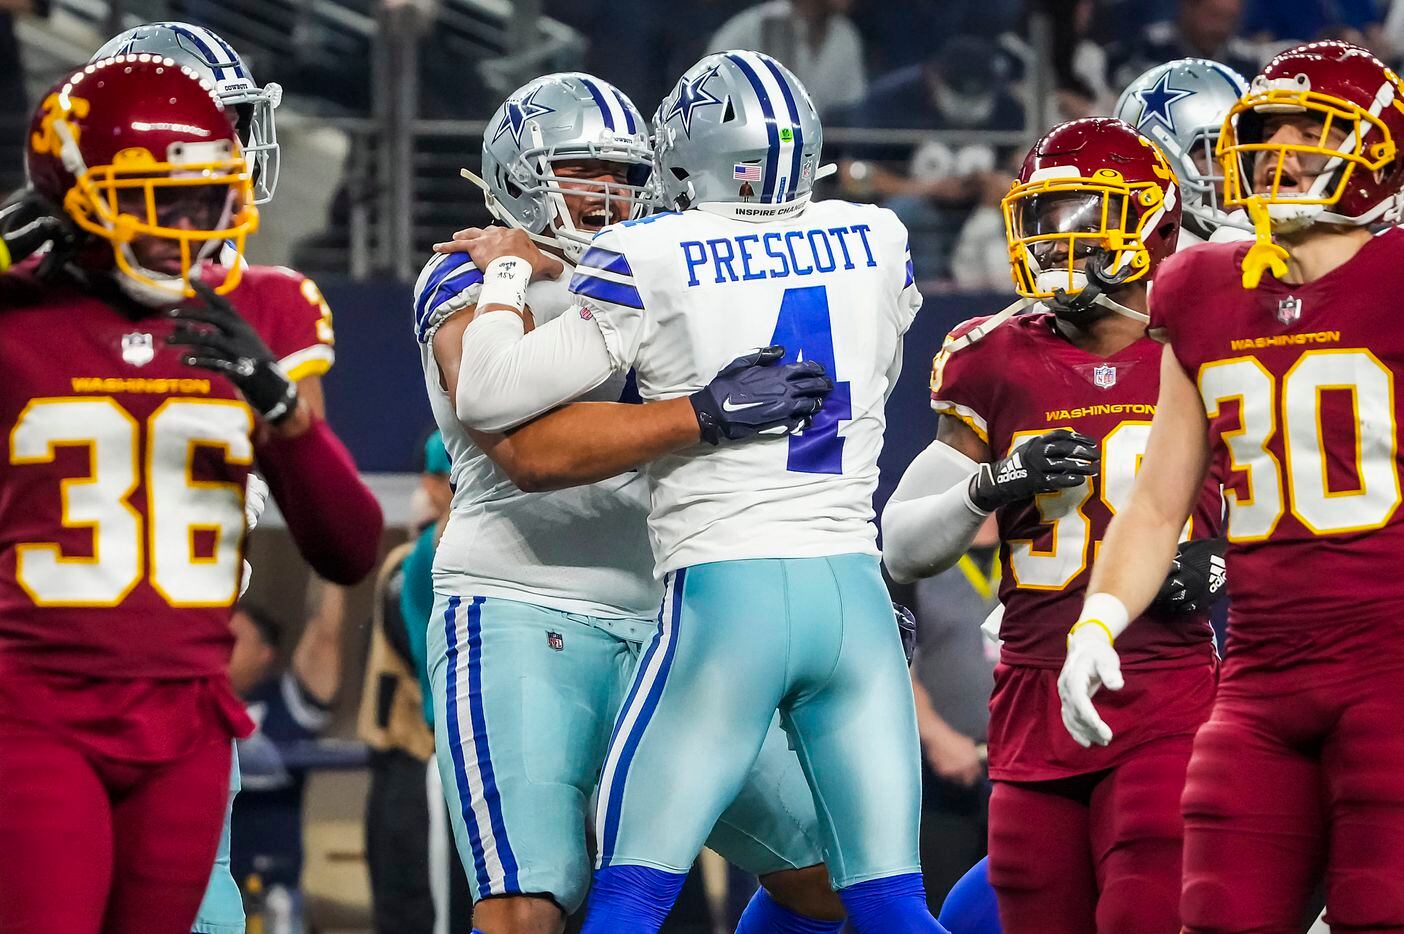 Dallas Cowboys offensive tackle Terence Steele (78) celebrates with quarterback Dak Prescott (4) after scoring on a 1-yard touchdown reception during the first half of an NFL football game against the Washington Football Team at AT&T Stadium on Sunday, Dec. 26, 2021, in Arlington.